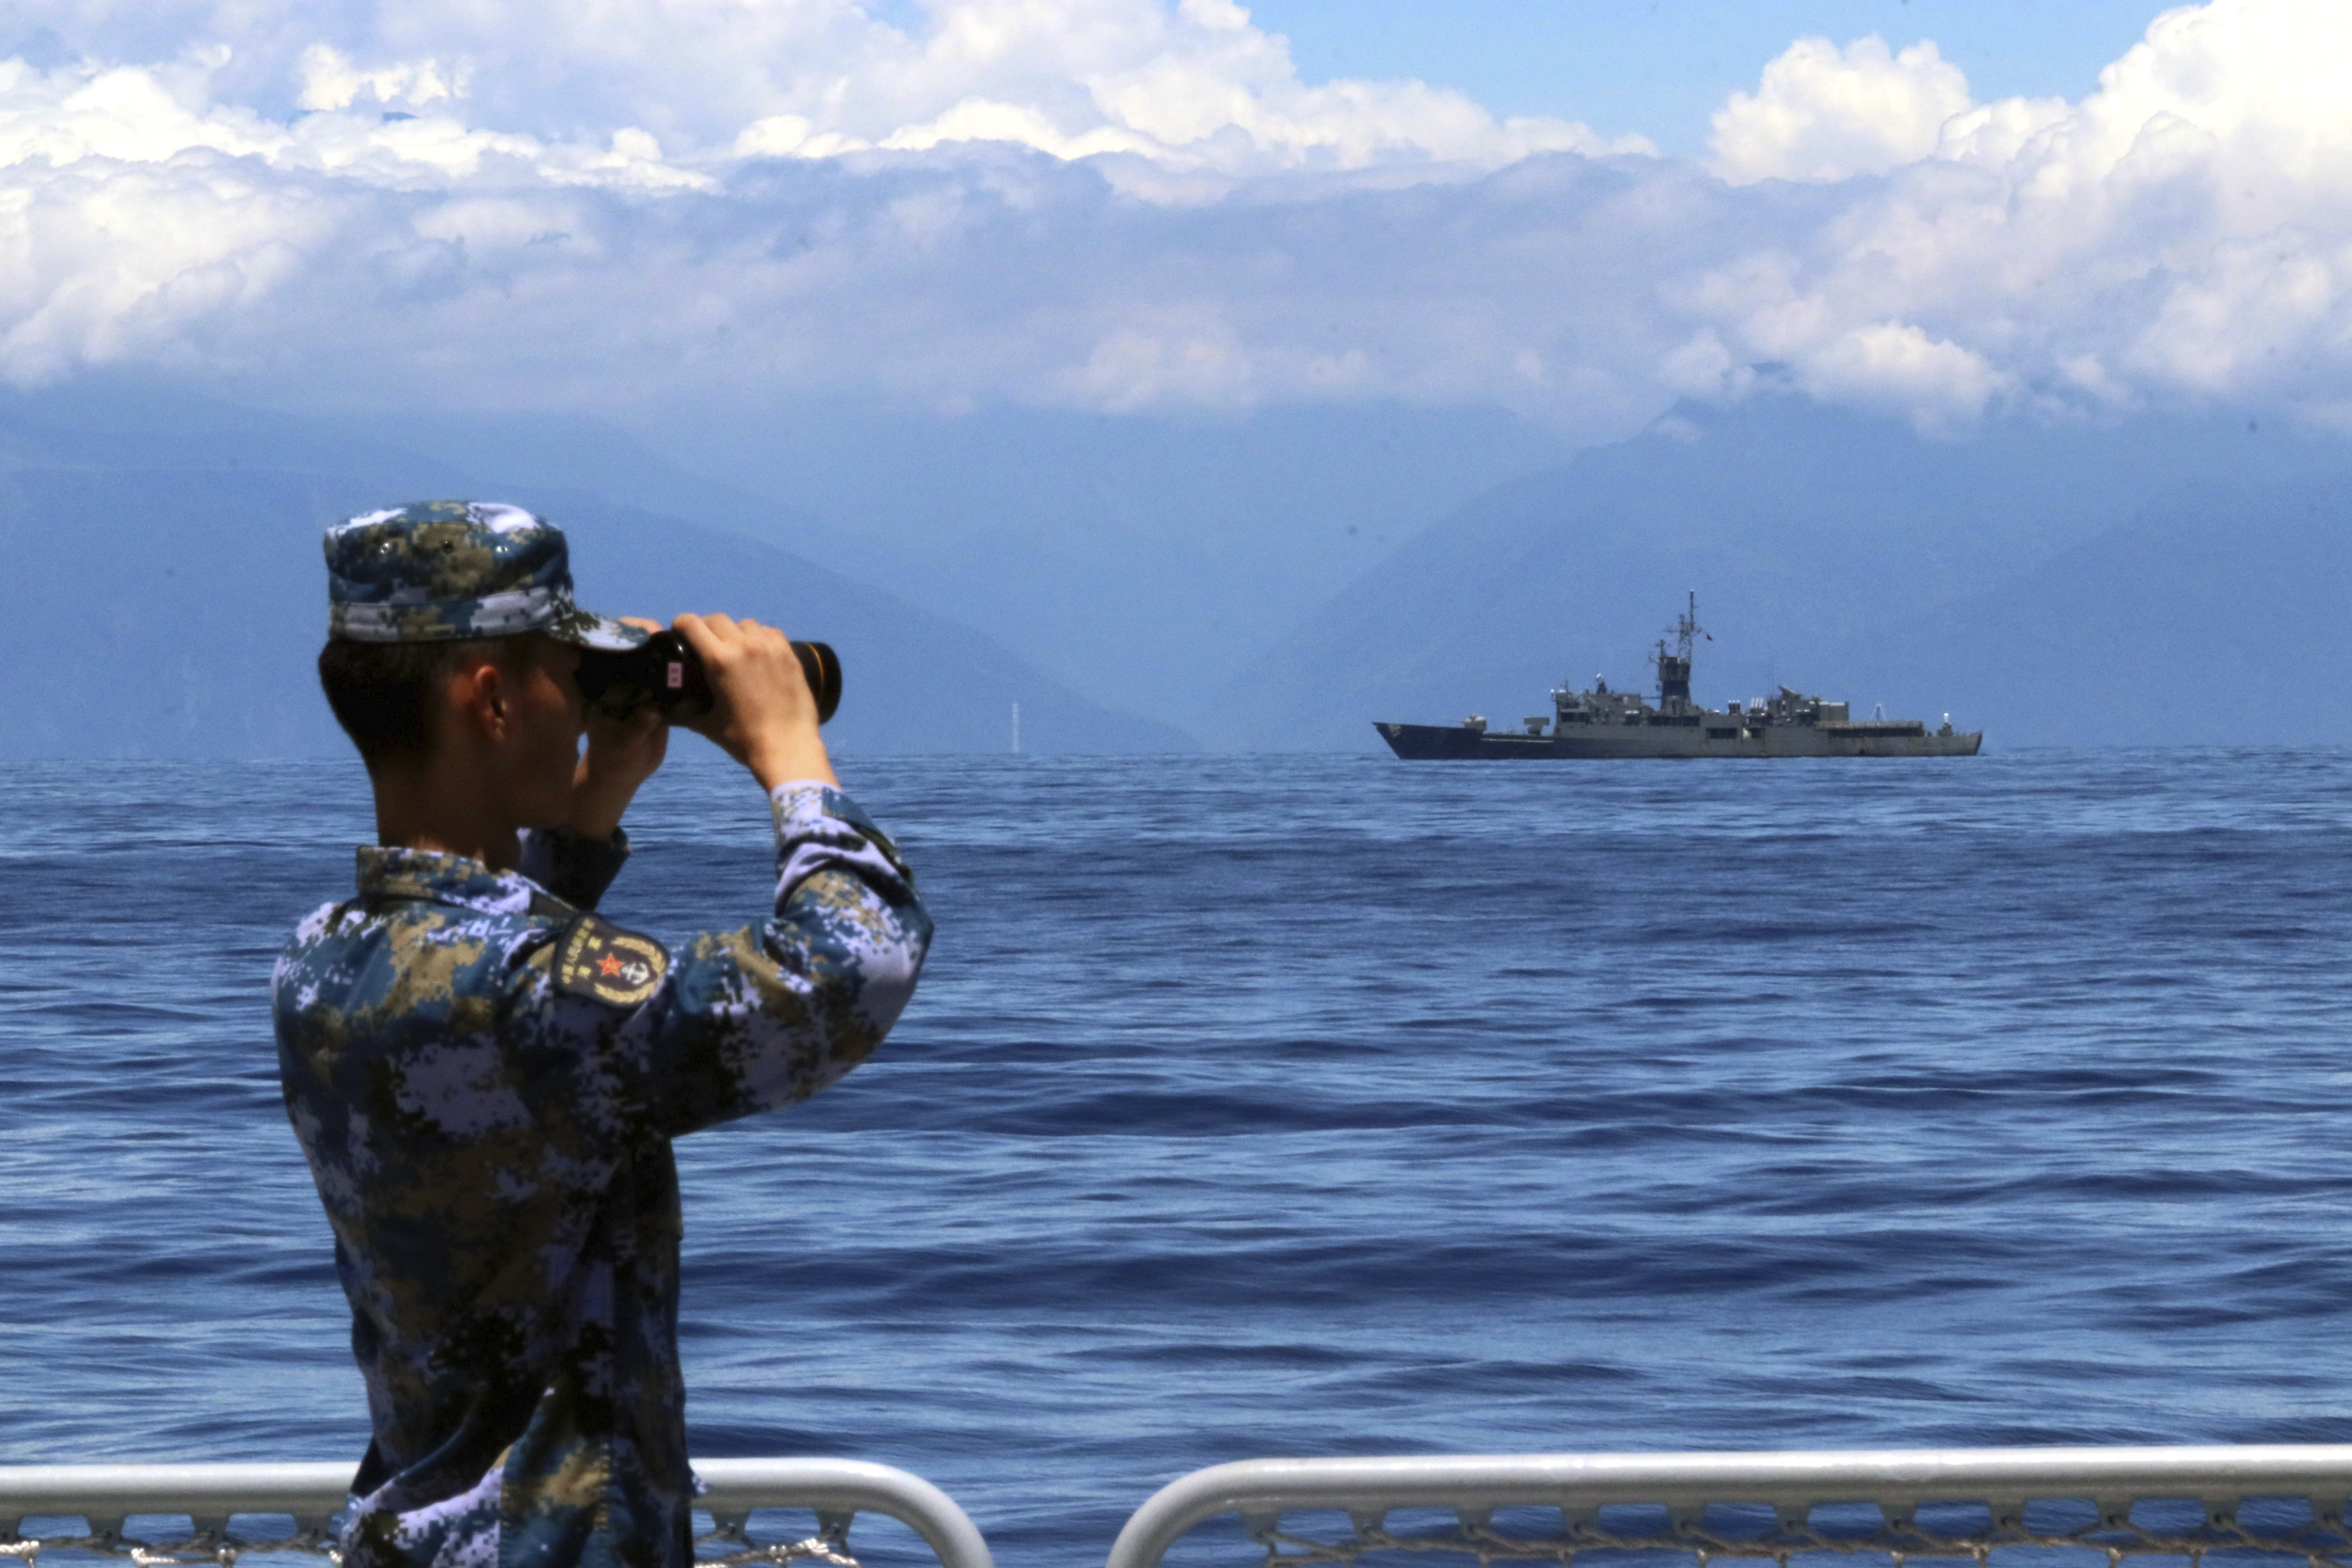 A People’s Liberation Army soldier looks on during military exercises in and over waters around Taiwan on August 5. A Taiwan frigate is seen in the background. Photo: Xinhua via AP